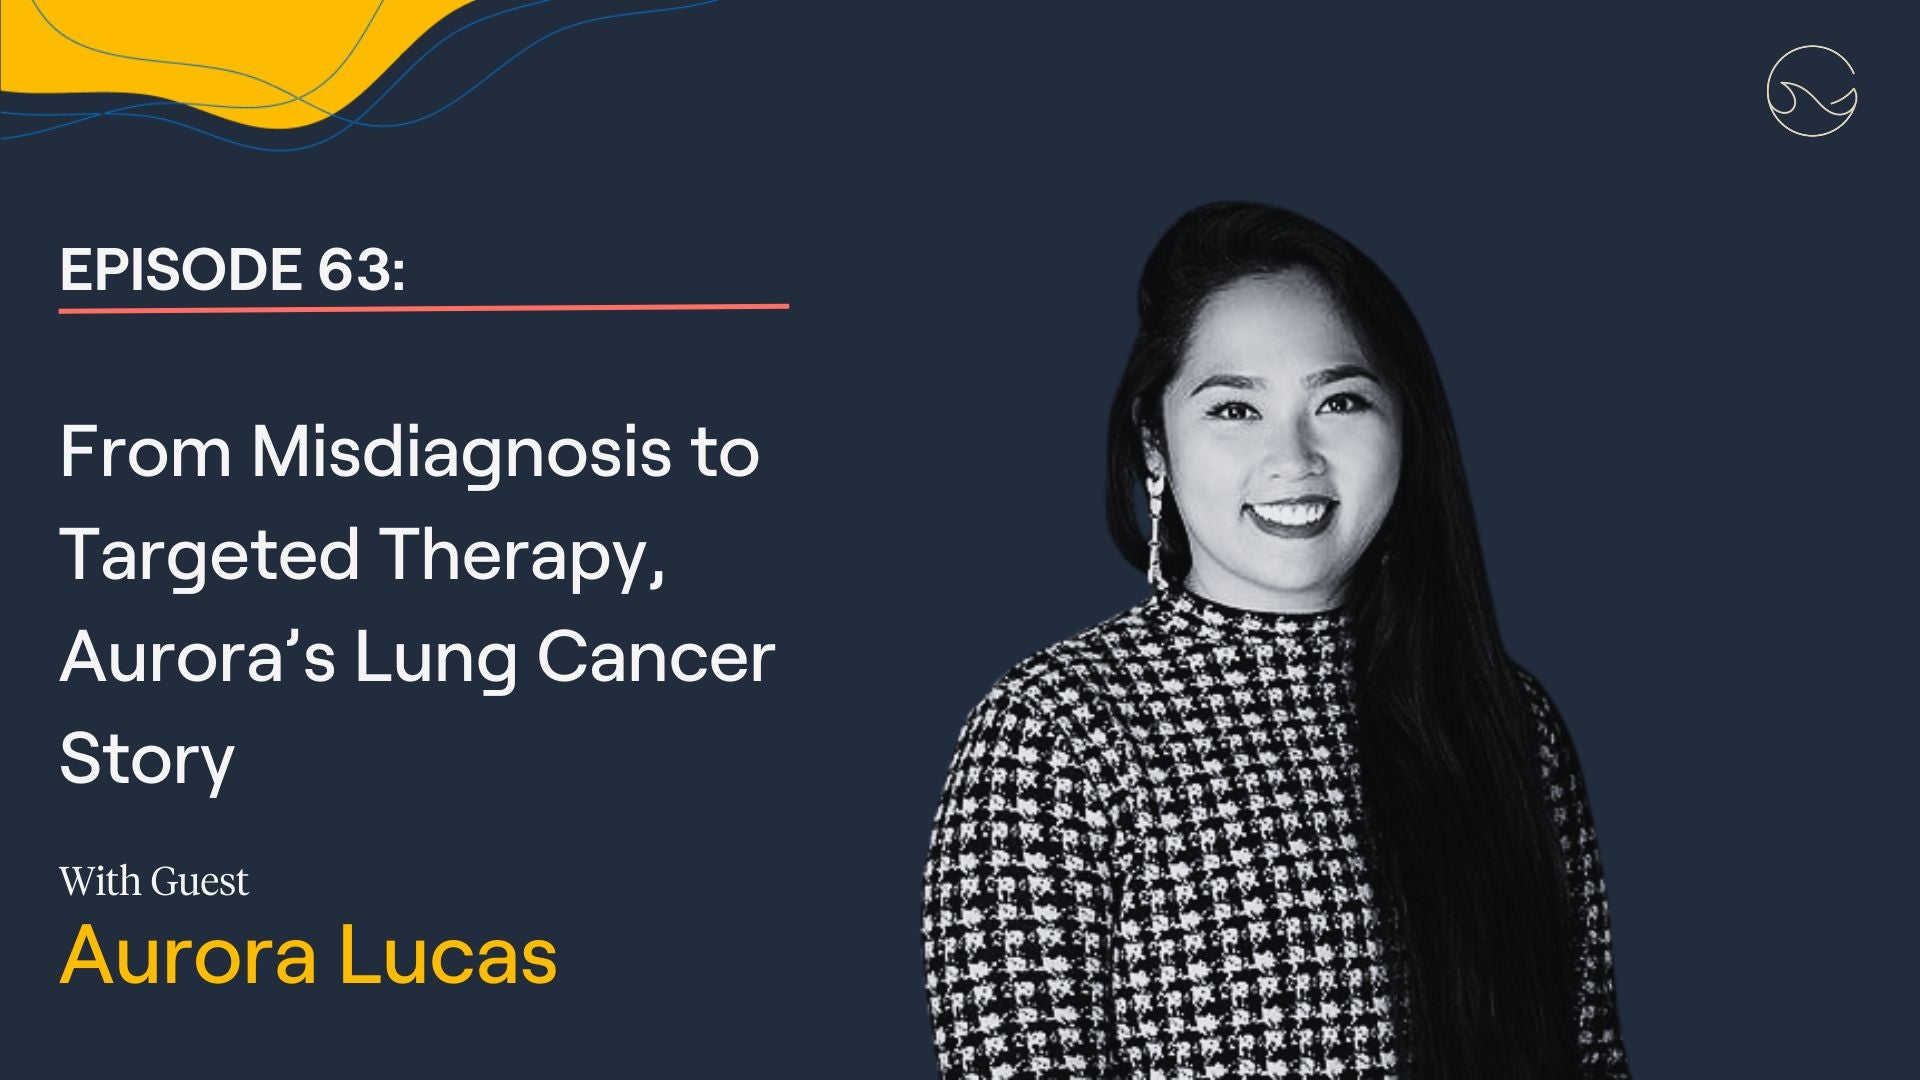 Load video: The latest episode of &quot;The Patient from Hell&quot; features Aurora Lucas talking about her lung cancer diagnosis, biomarker testing and targeted treatment.